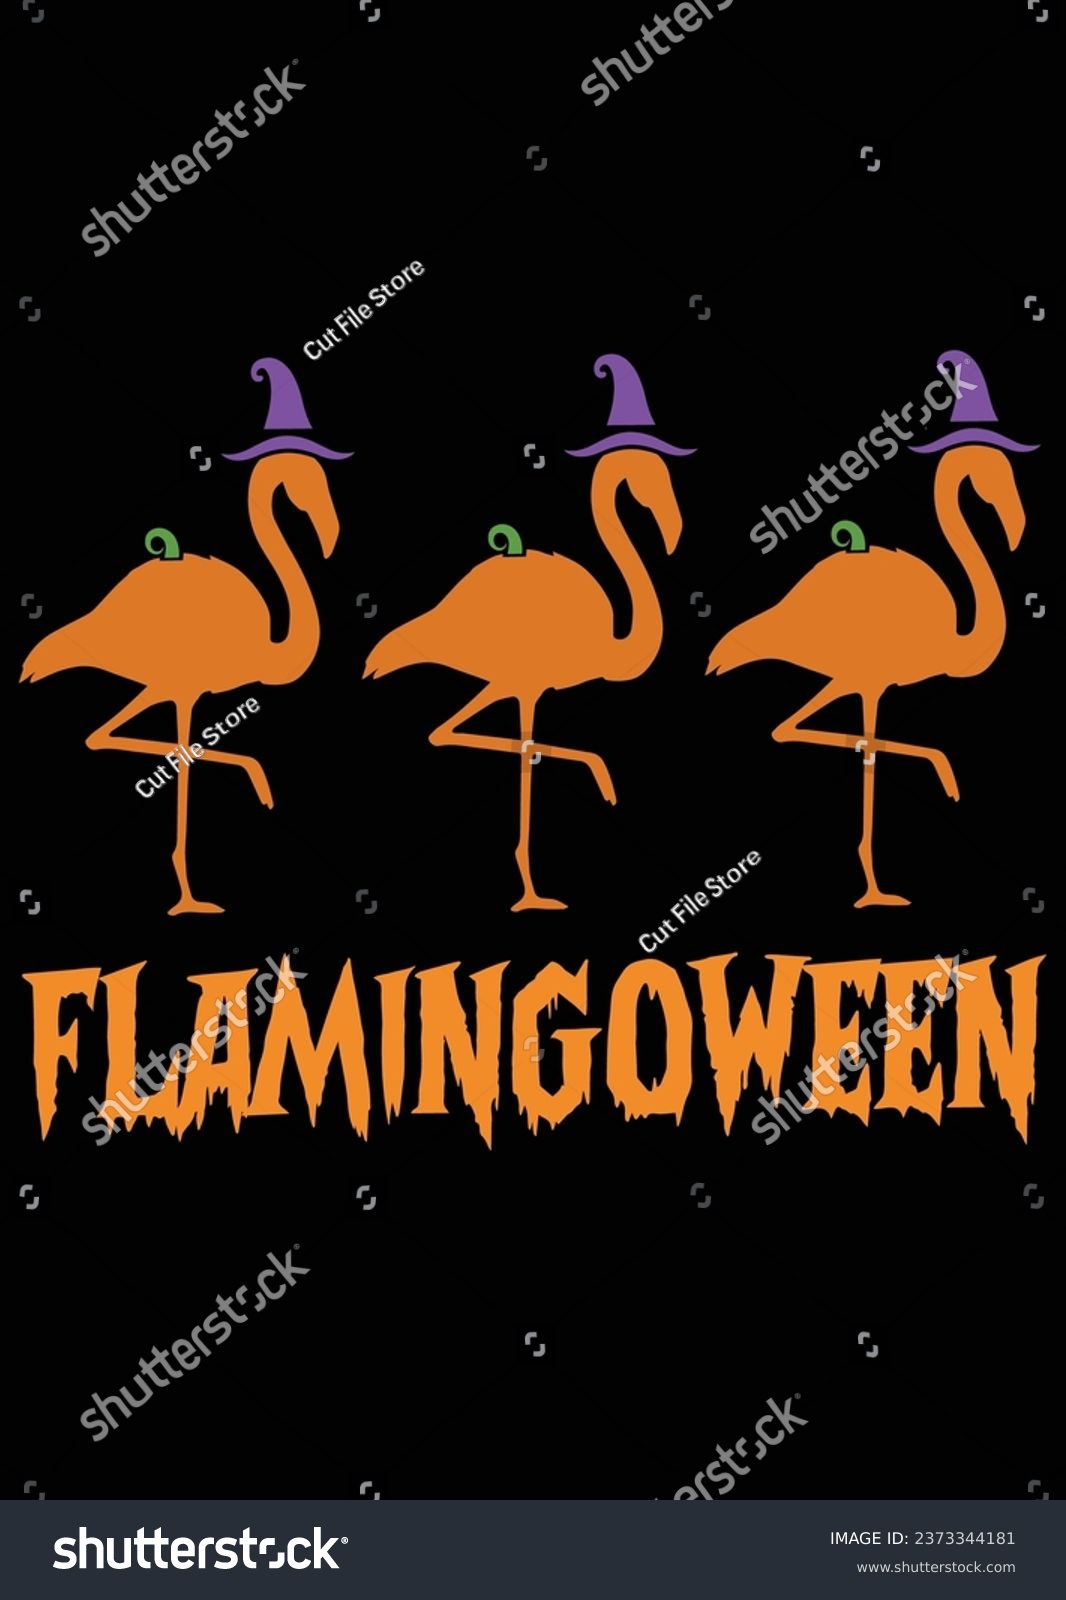 SVG of 
Funny Halloween Flamingo ween eps cut file for cutting machine svg